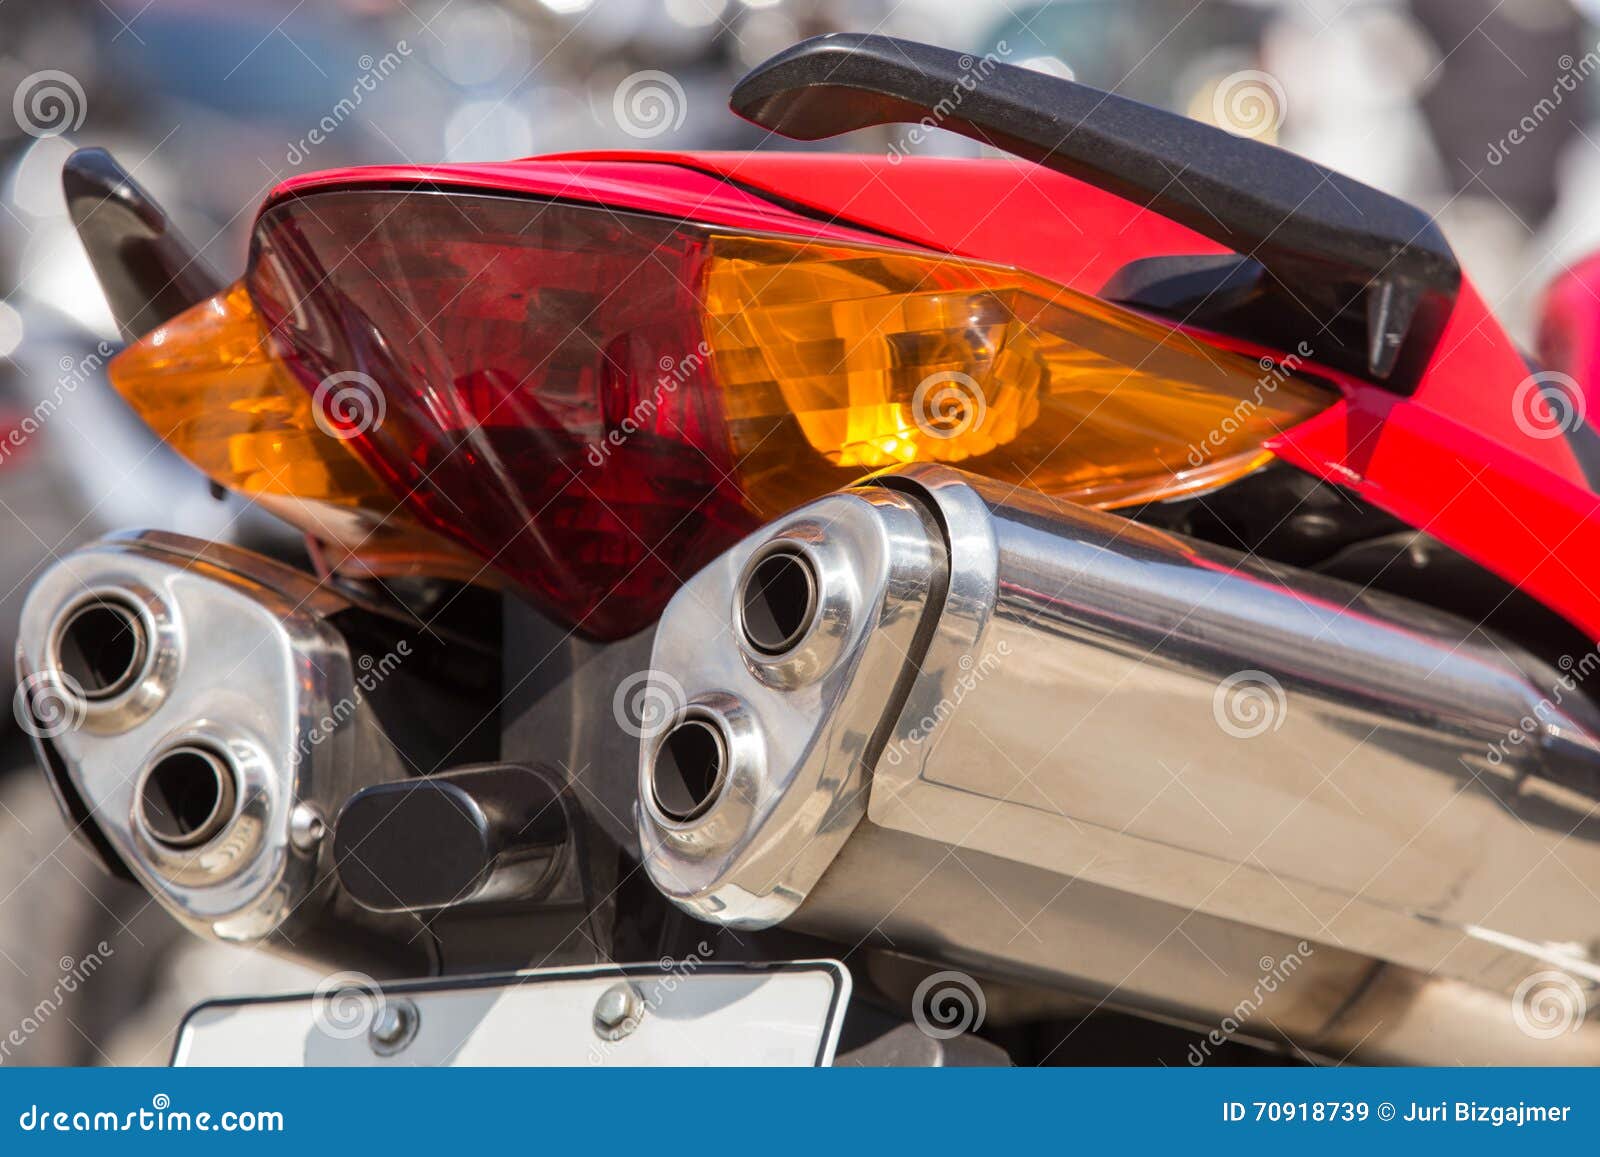 Motorcycle exhaust pipes stock image. Image of yellow - 70918739